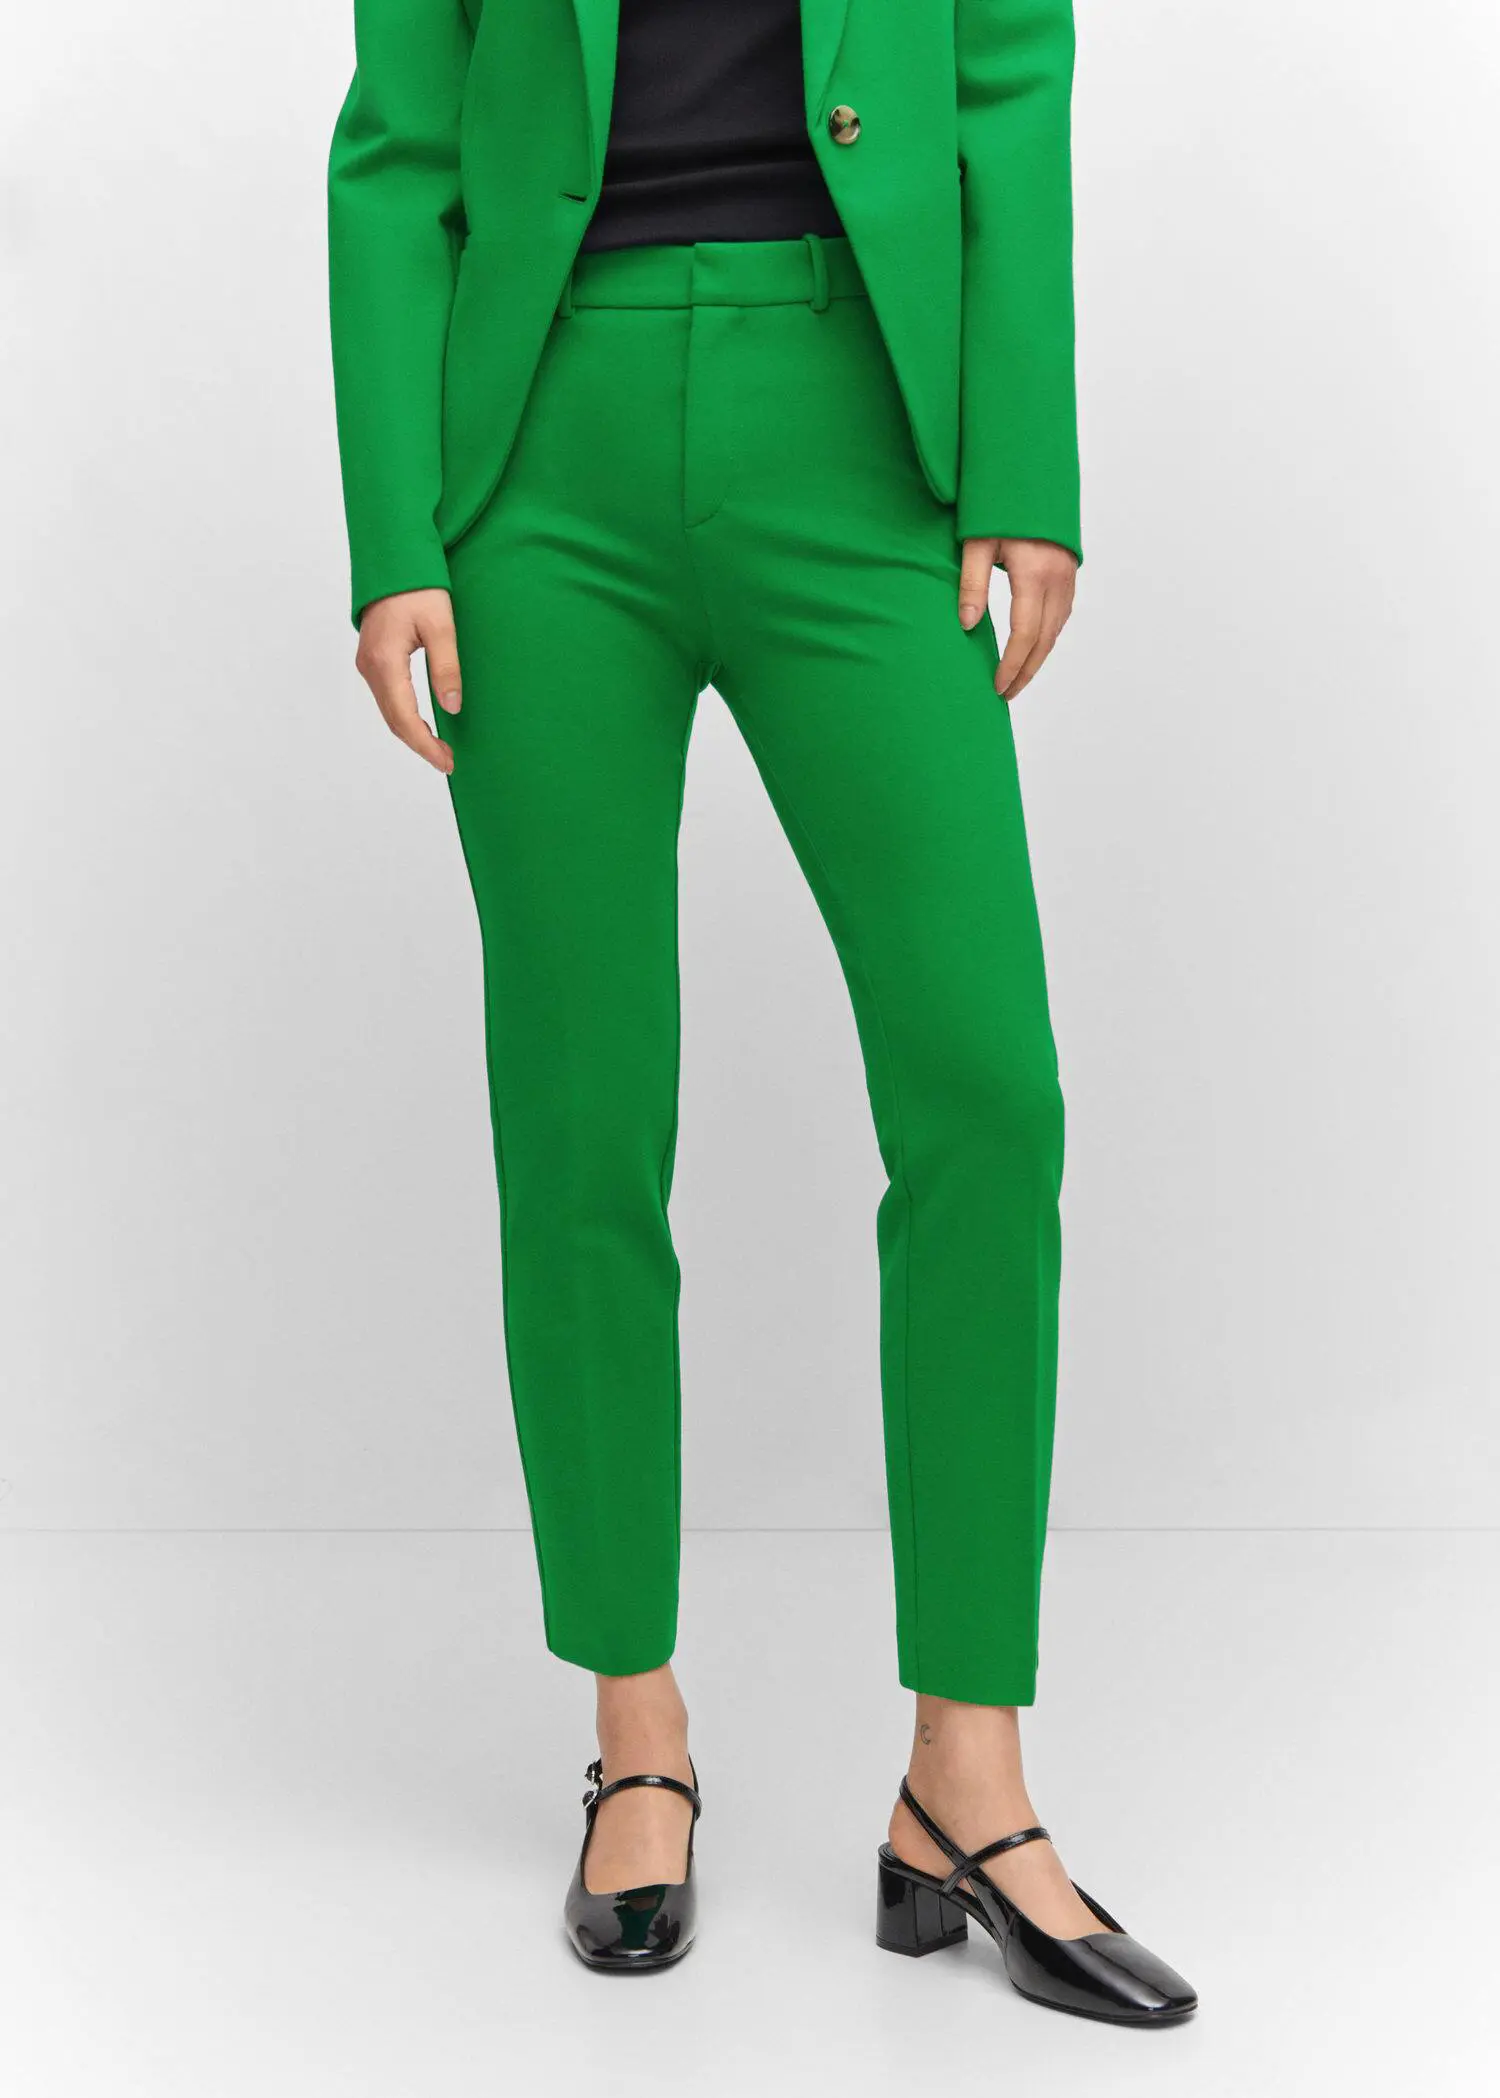 Mango Rome-knit straight pants. a person wearing a green suit and black shoes. 